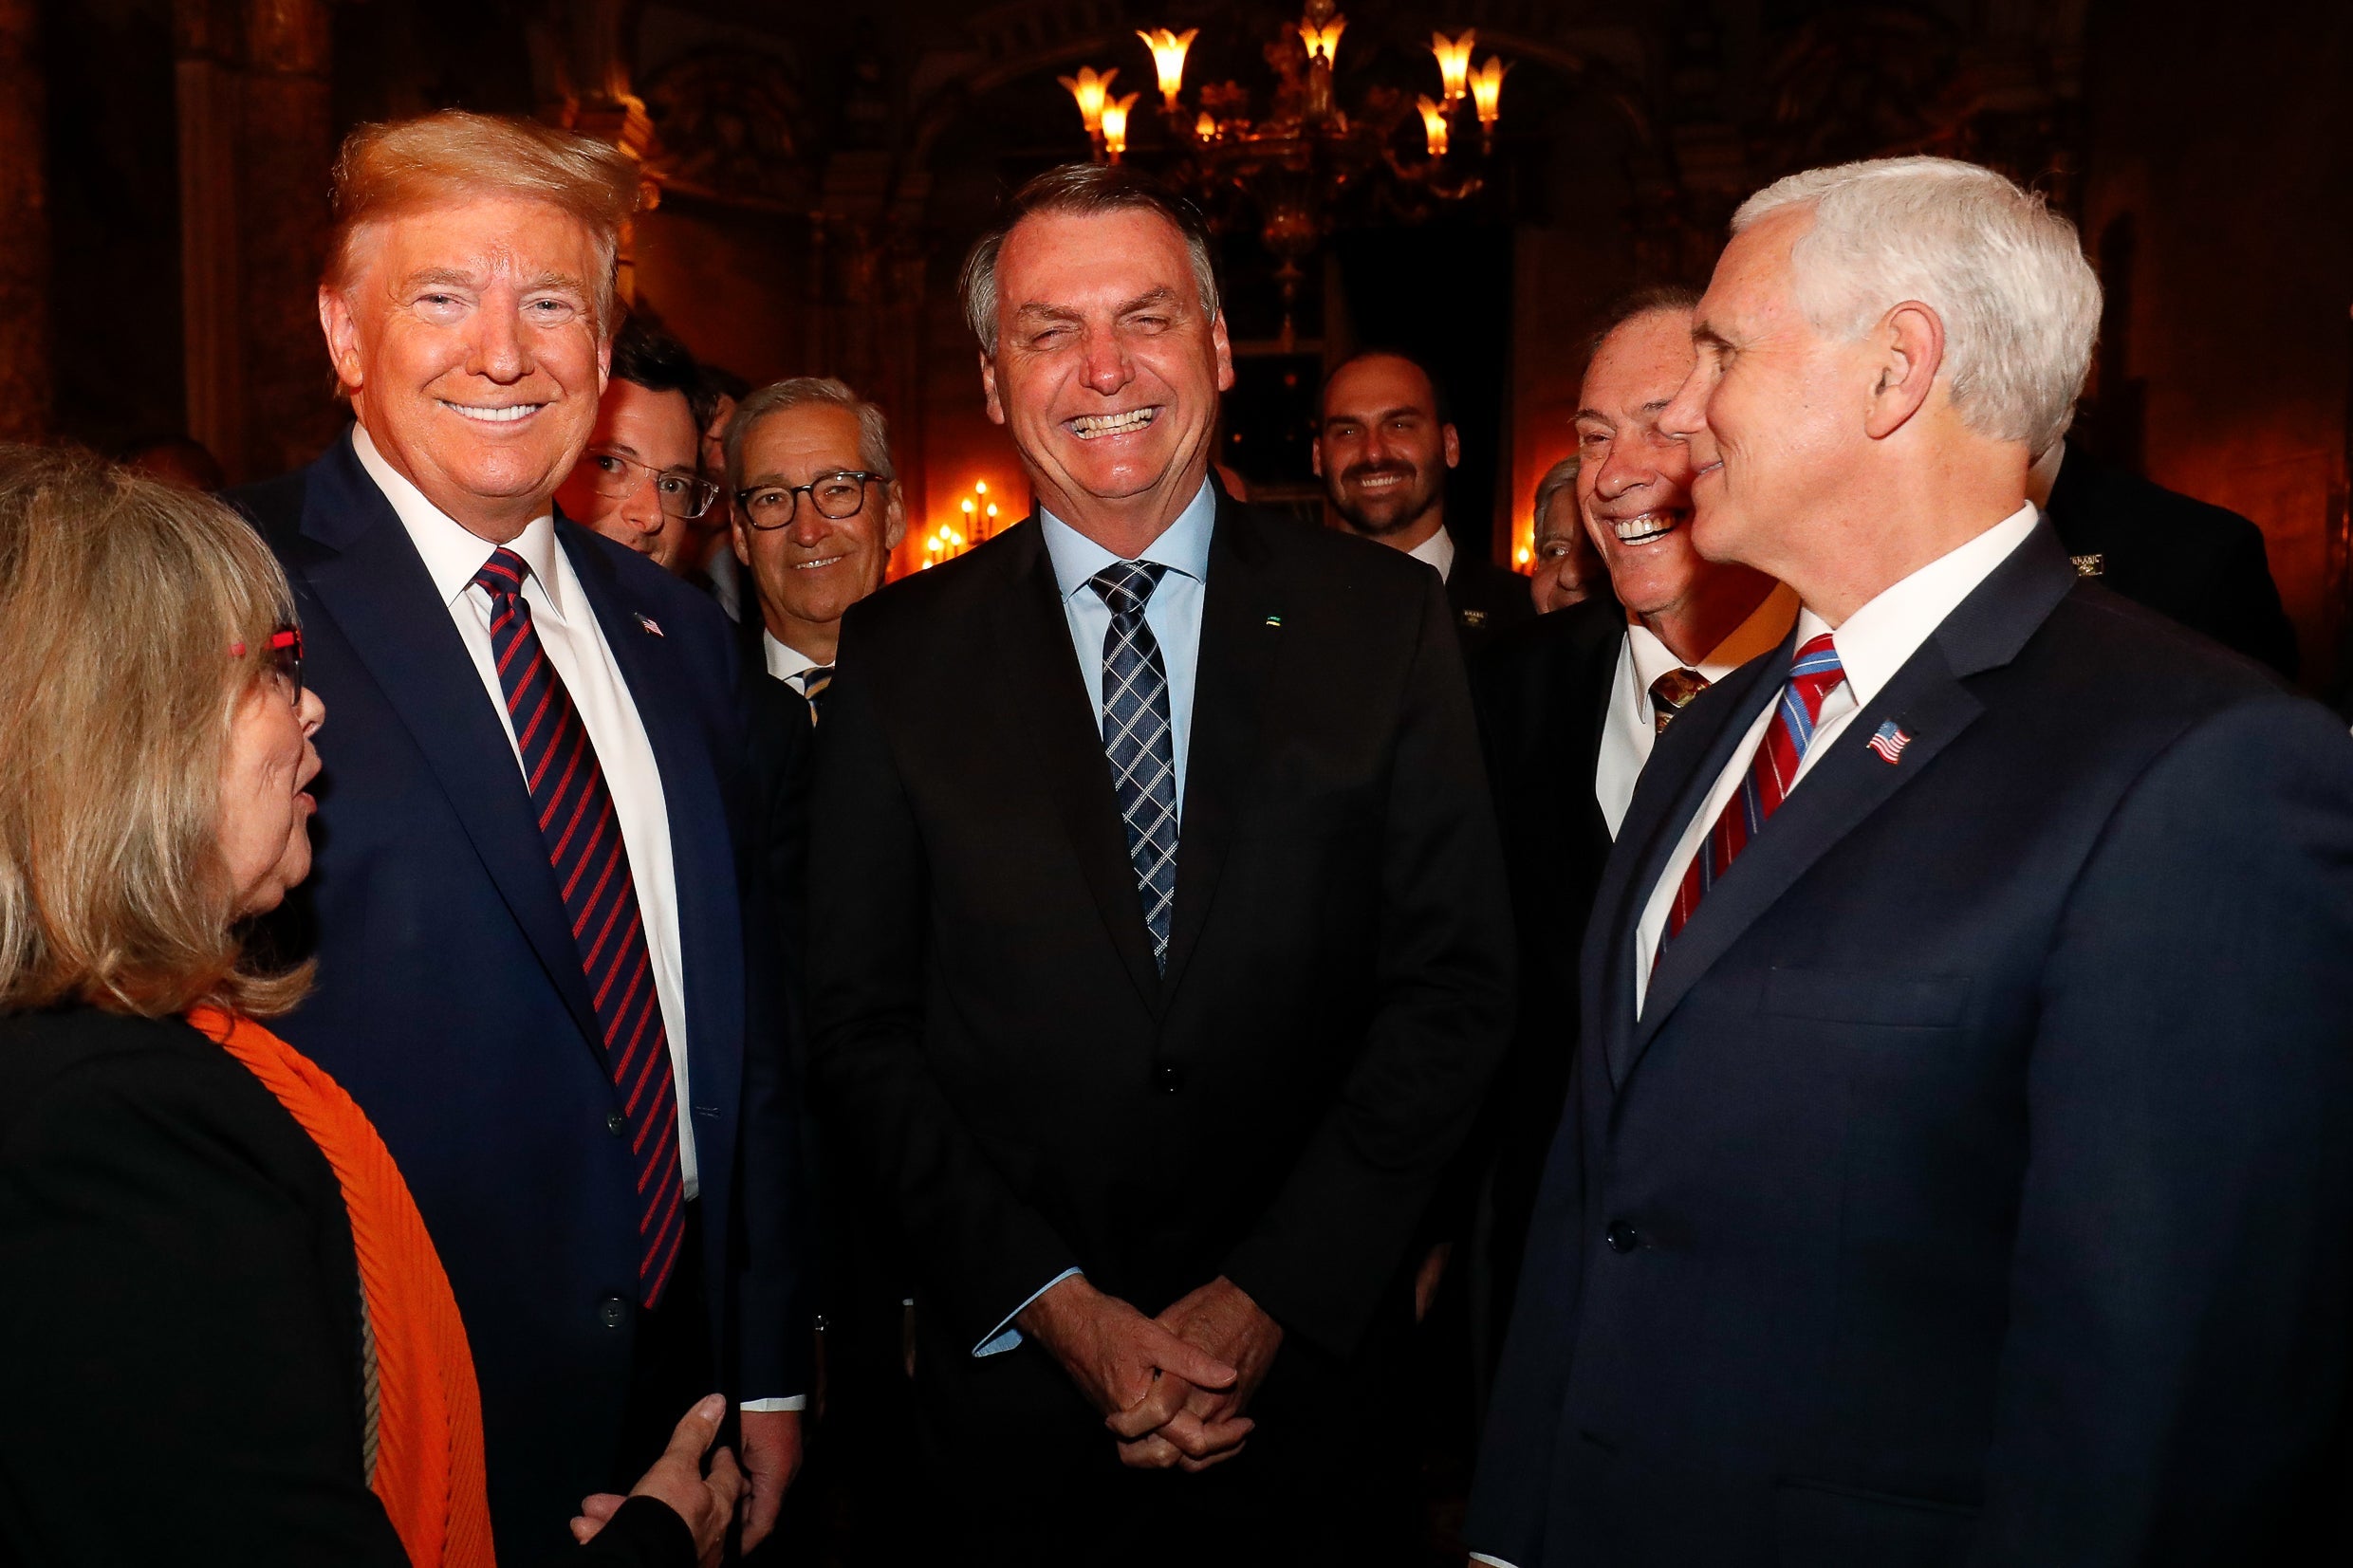 President Donald Trump and Vice President Mike Pence with the Brazilian delegation, including Fábio Wajngarten (over Trump’s shoulder), in Miami on Saturday.